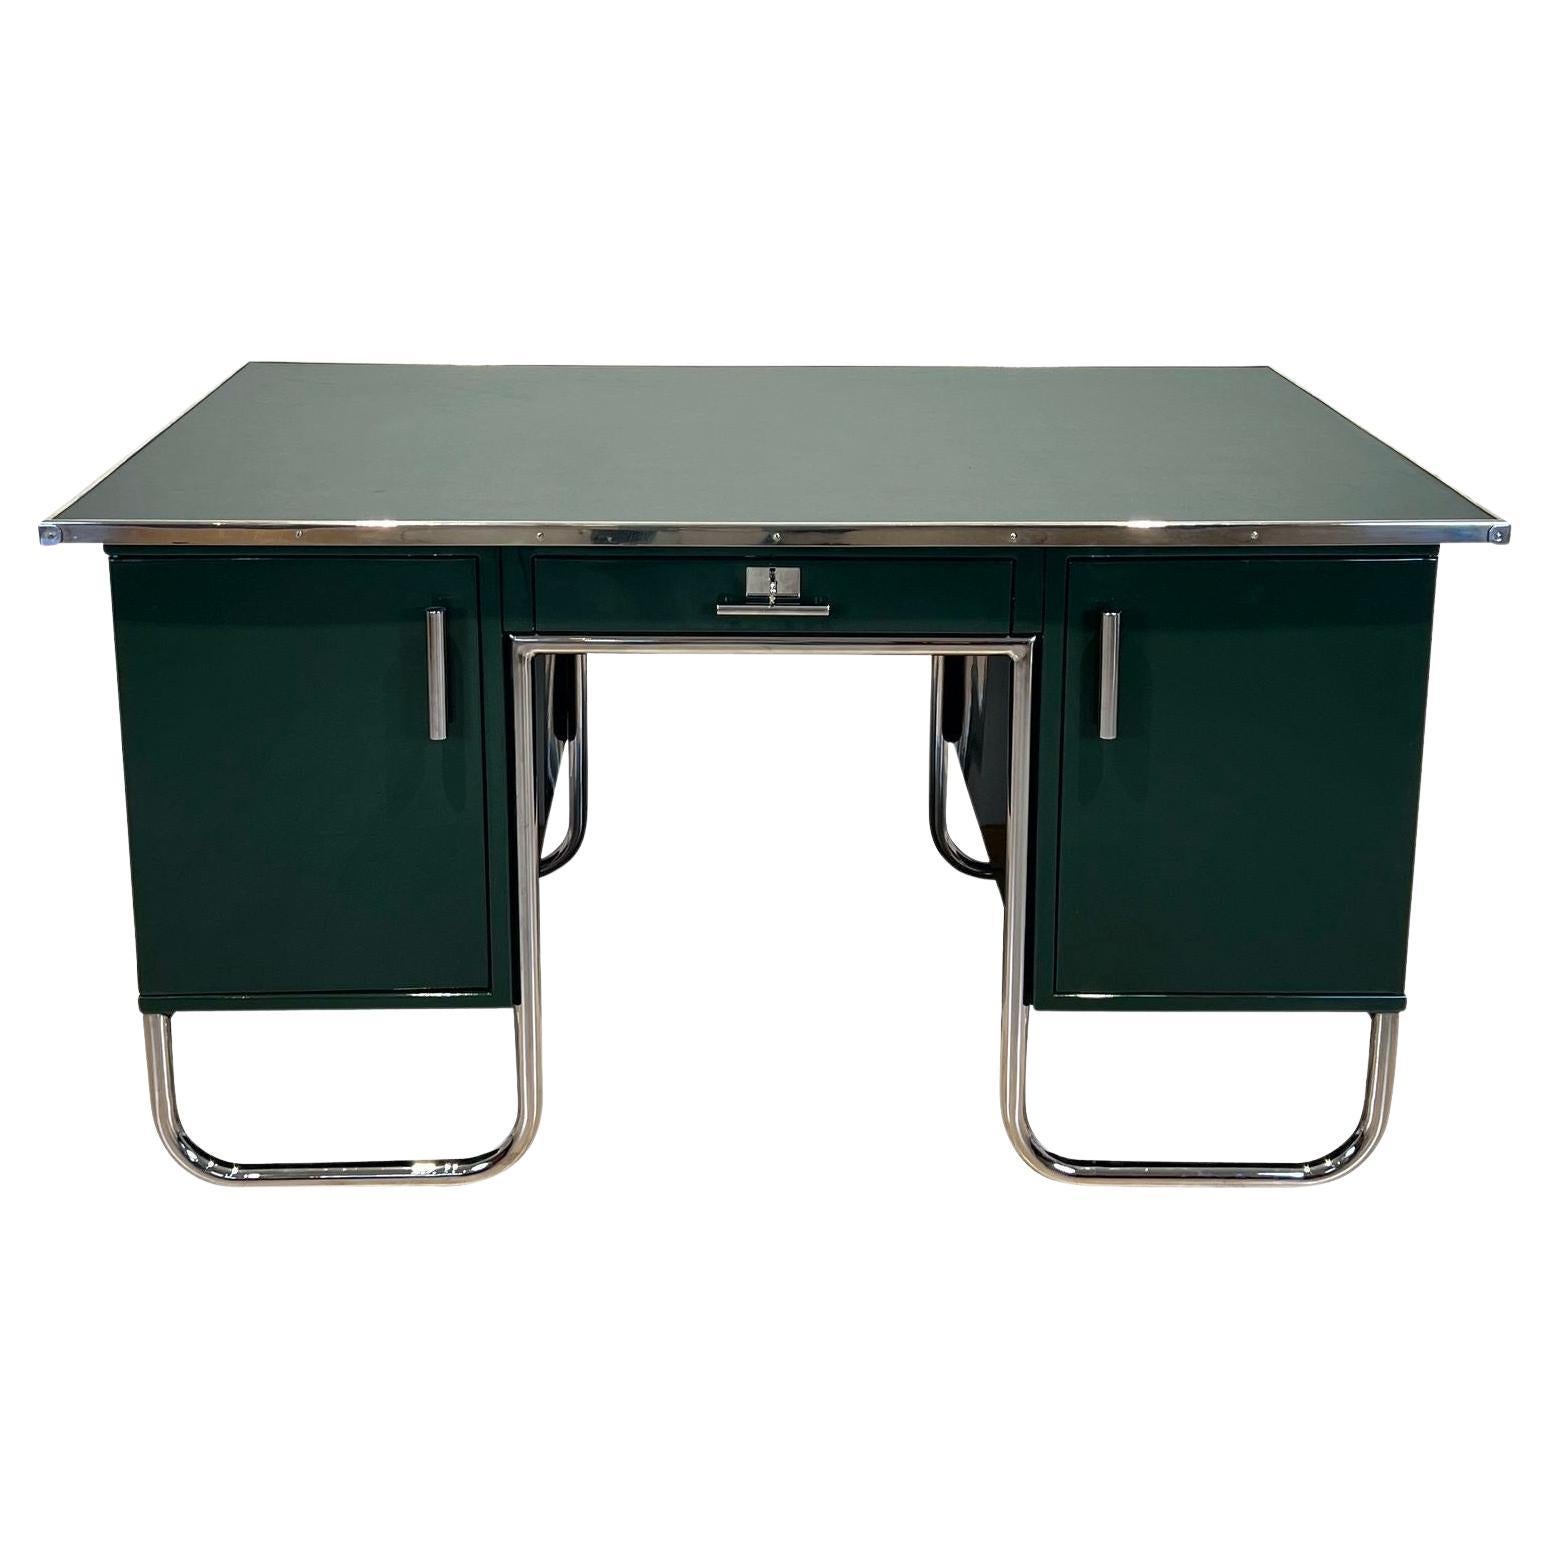 Bauhaus Partners Desk, Green Lacquered Metal and Chrome, Germany circa 1930